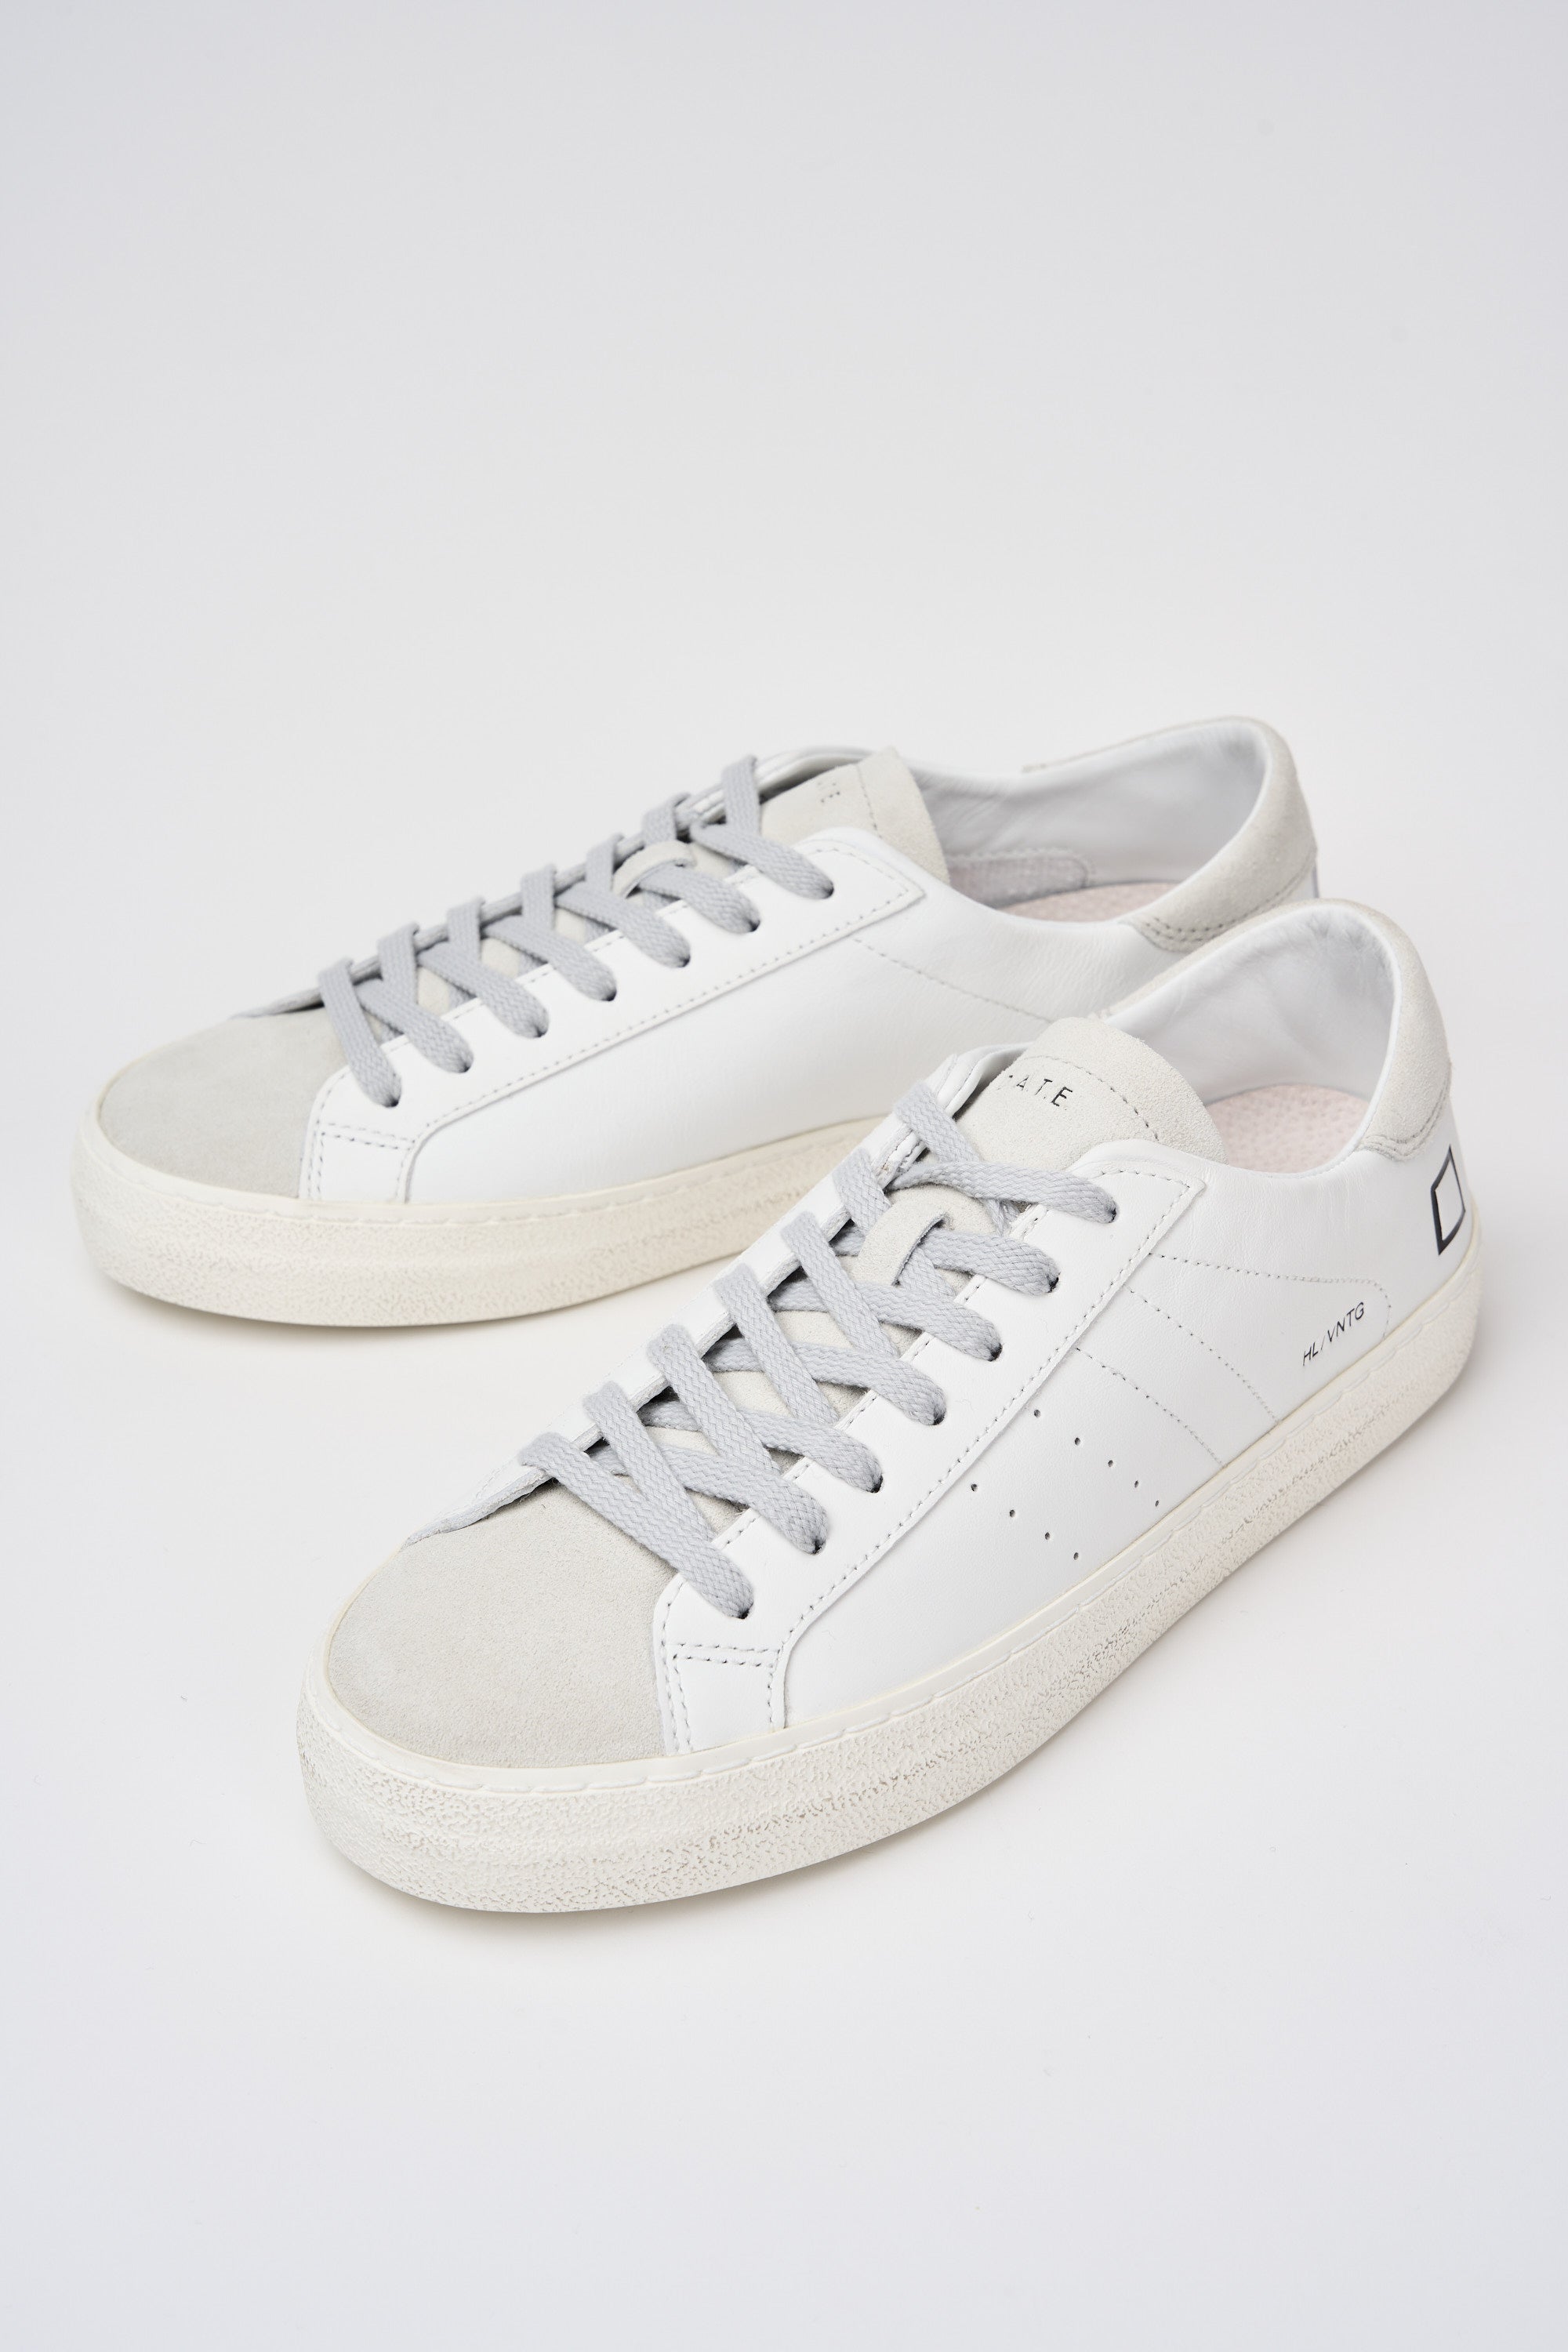 D.A.T.E. Sneaker Hill Low Vintage Leather/Suede White-7